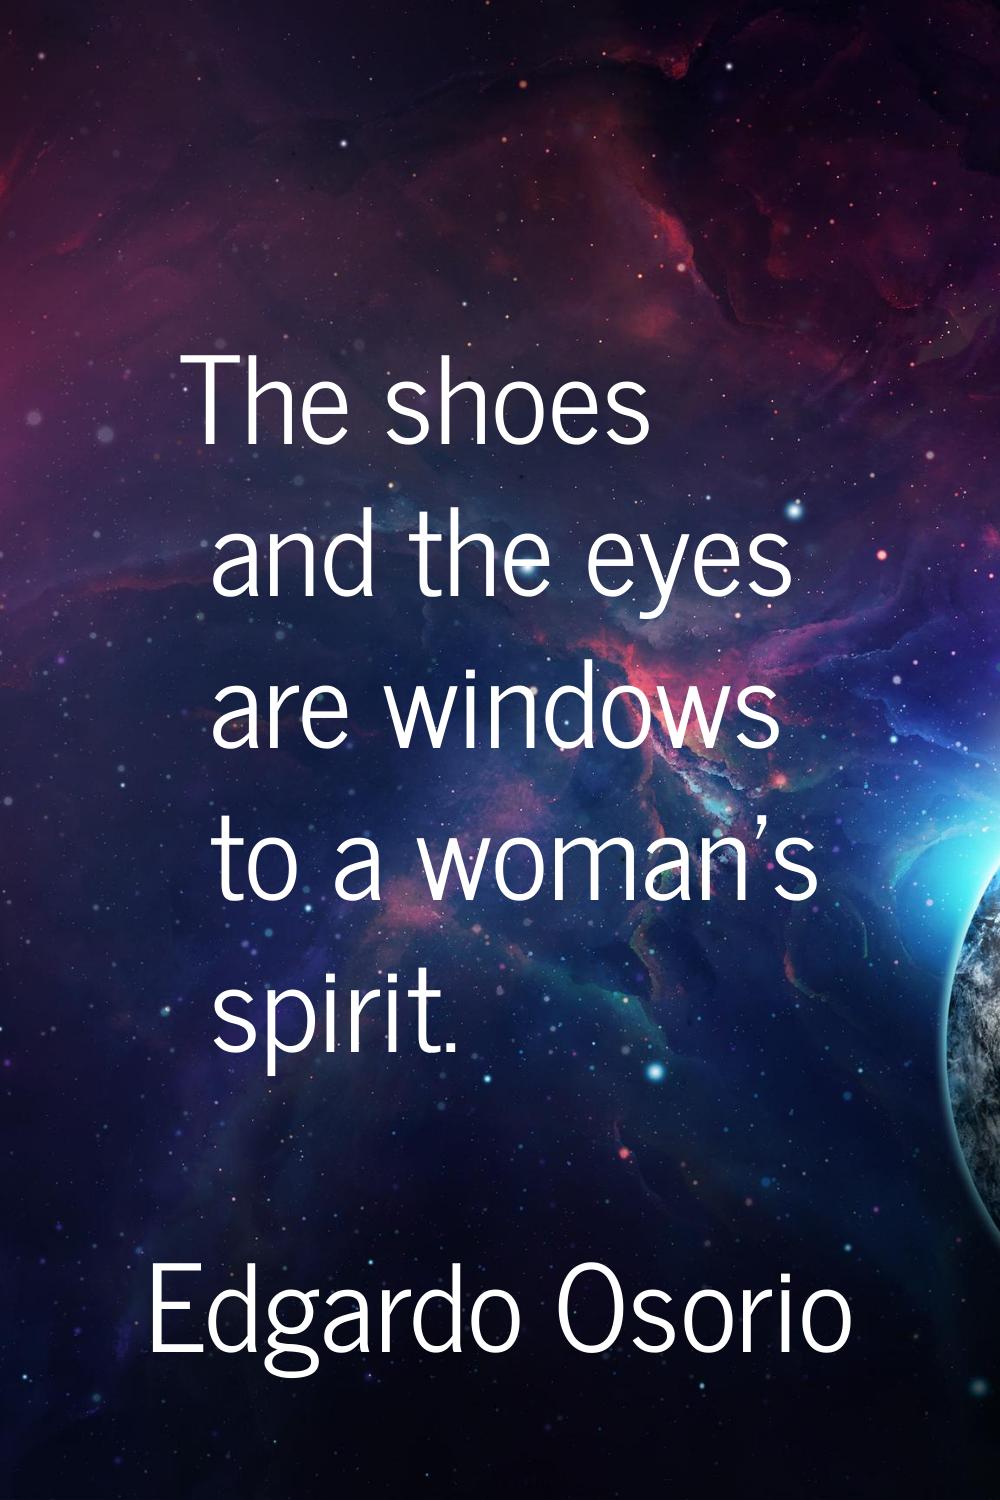 The shoes and the eyes are windows to a woman's spirit.